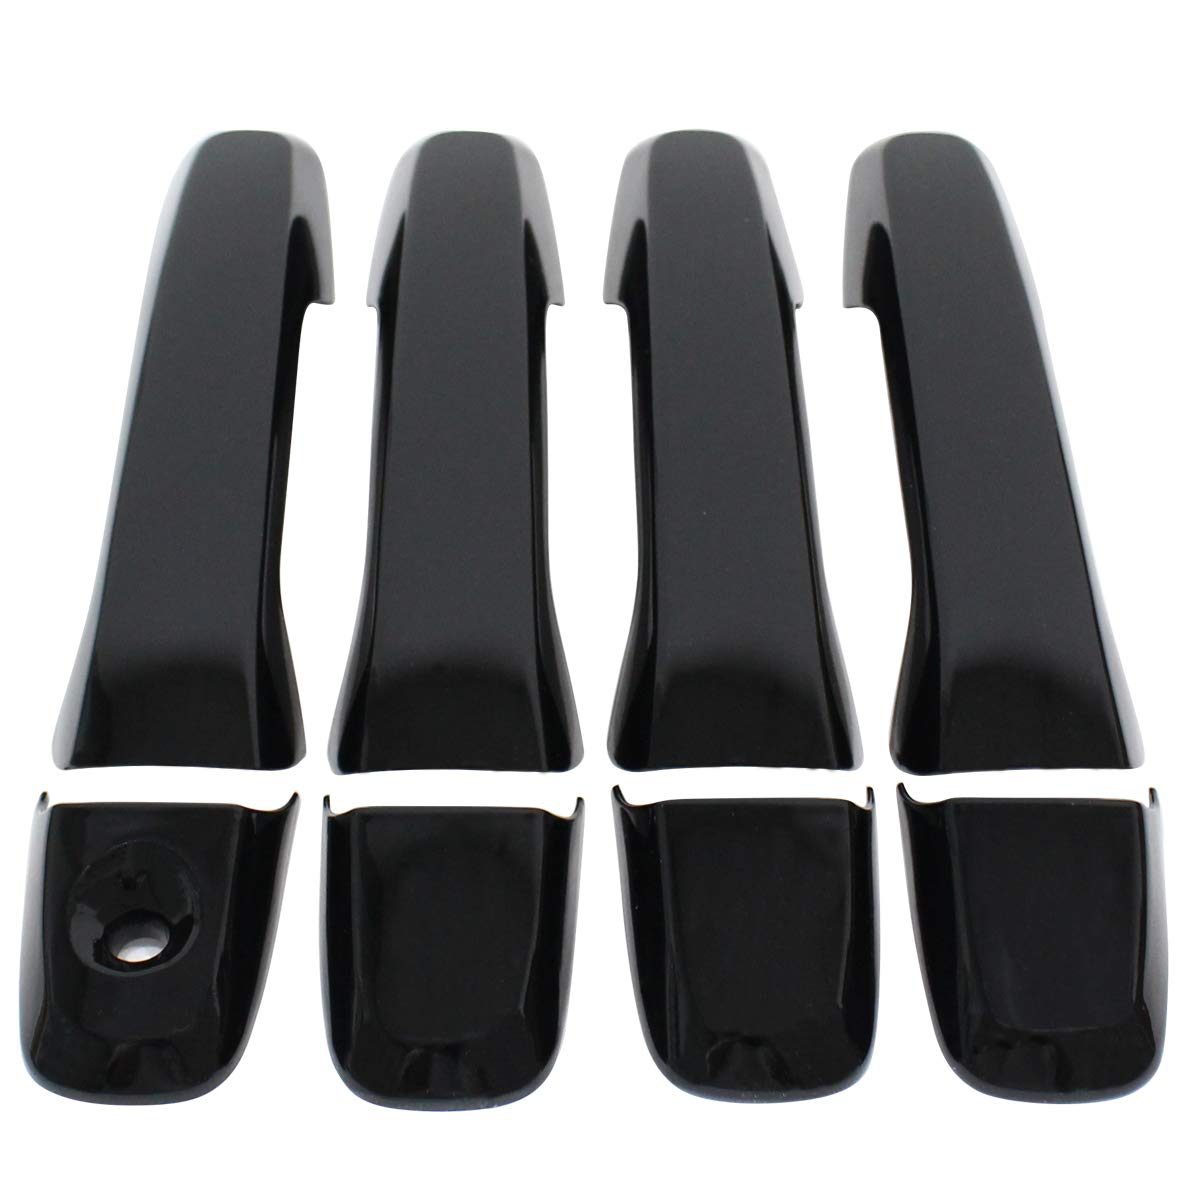 NewYall Black Exterior Door Handle Covers for Ford Edge Explorer 2011-2016 Outer Front Rear Left Driver and Right Passenger Side